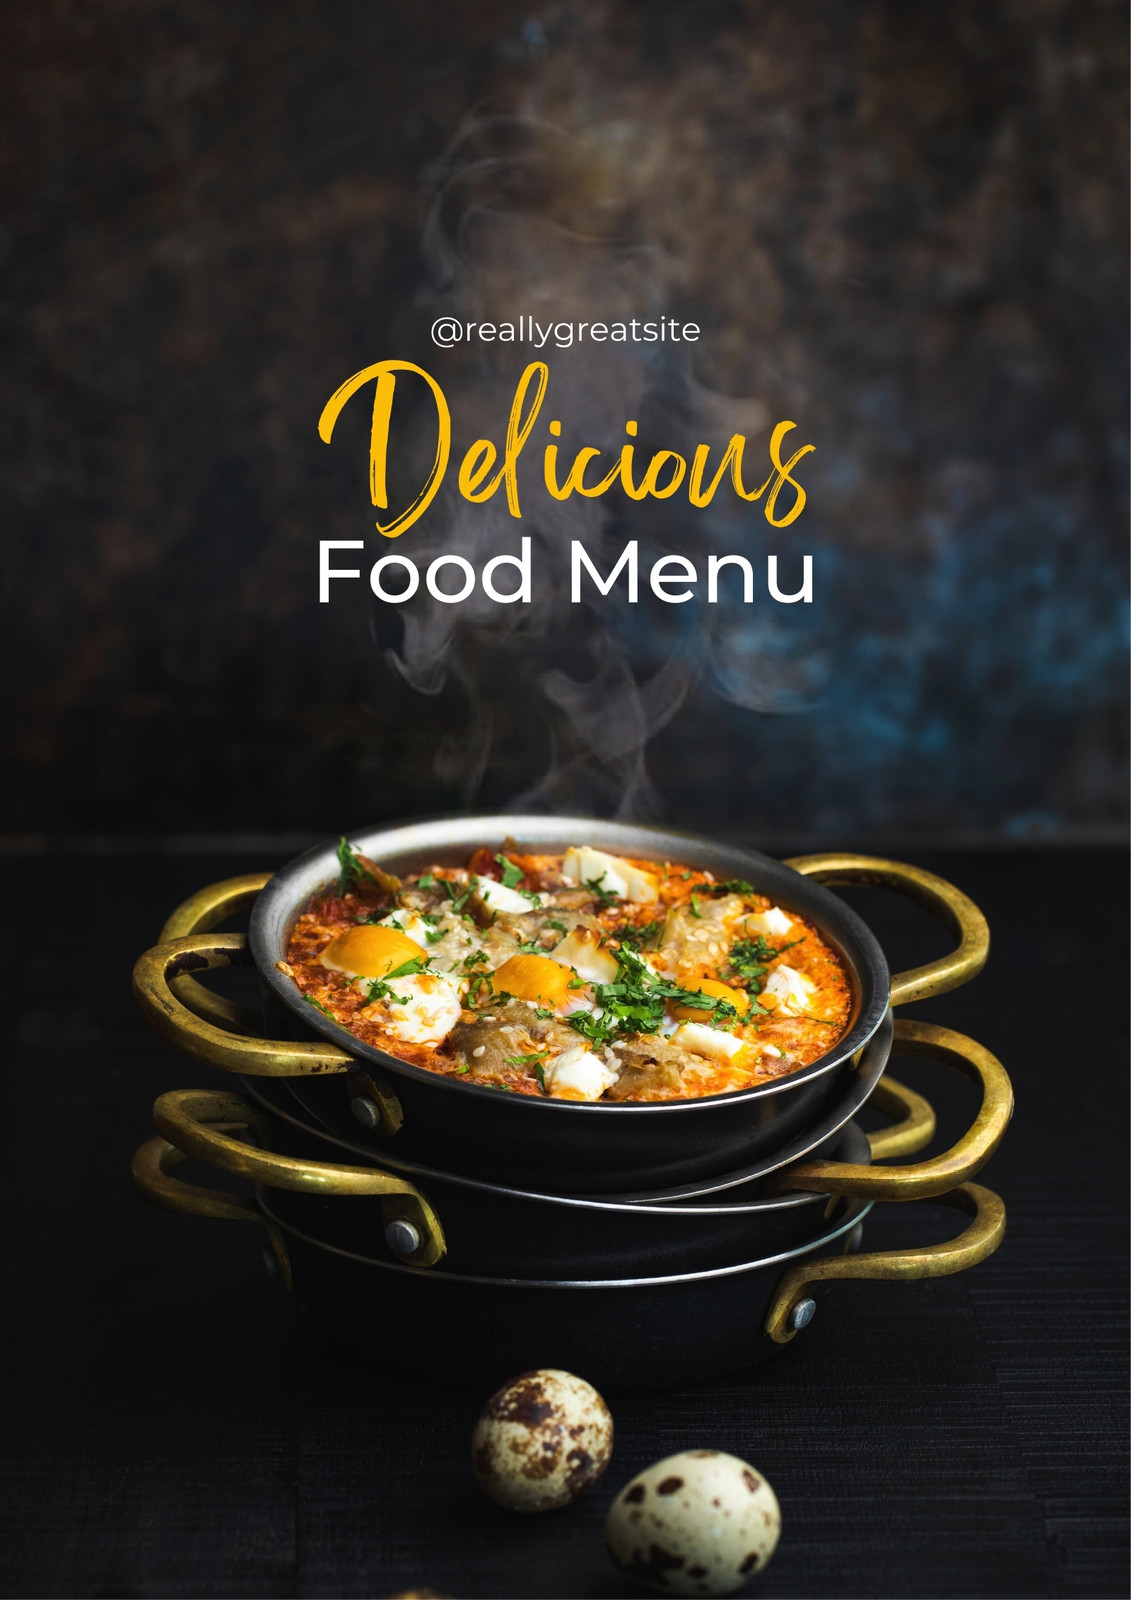 Customize 6,016+ Food Poster Templates Online - Canva